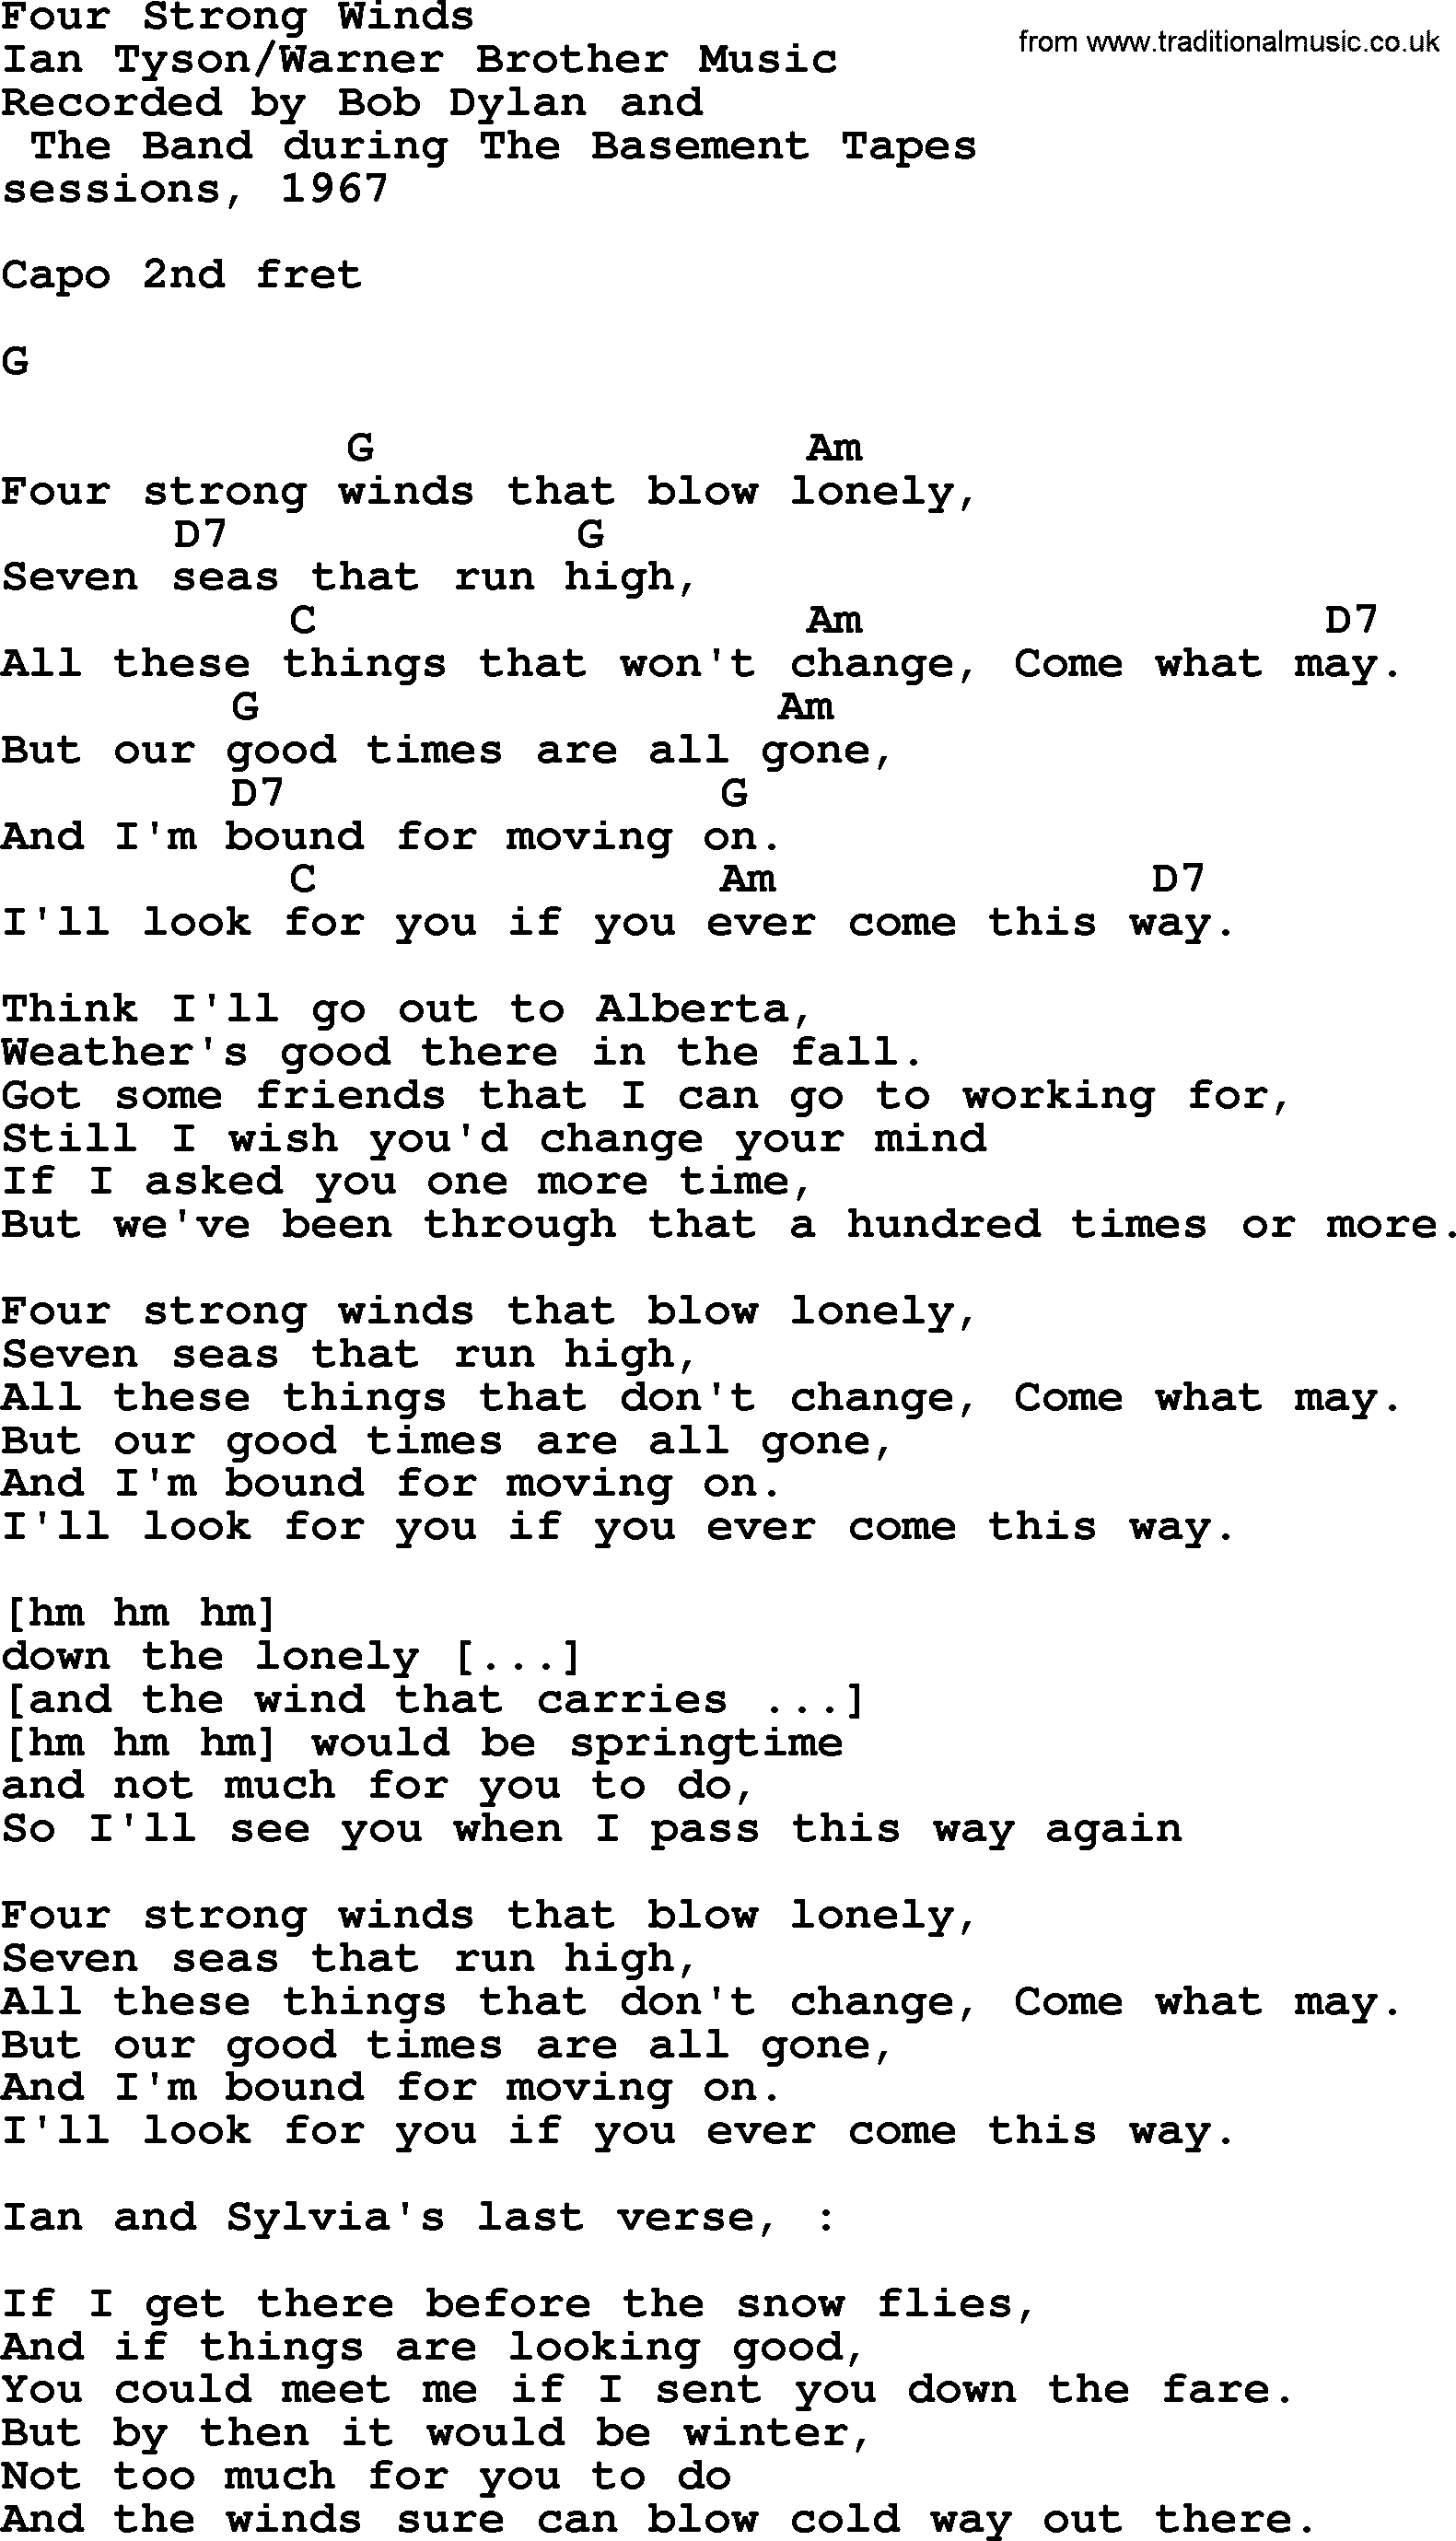 Bob Dylan song, lyrics with chords - Four Strong Winds